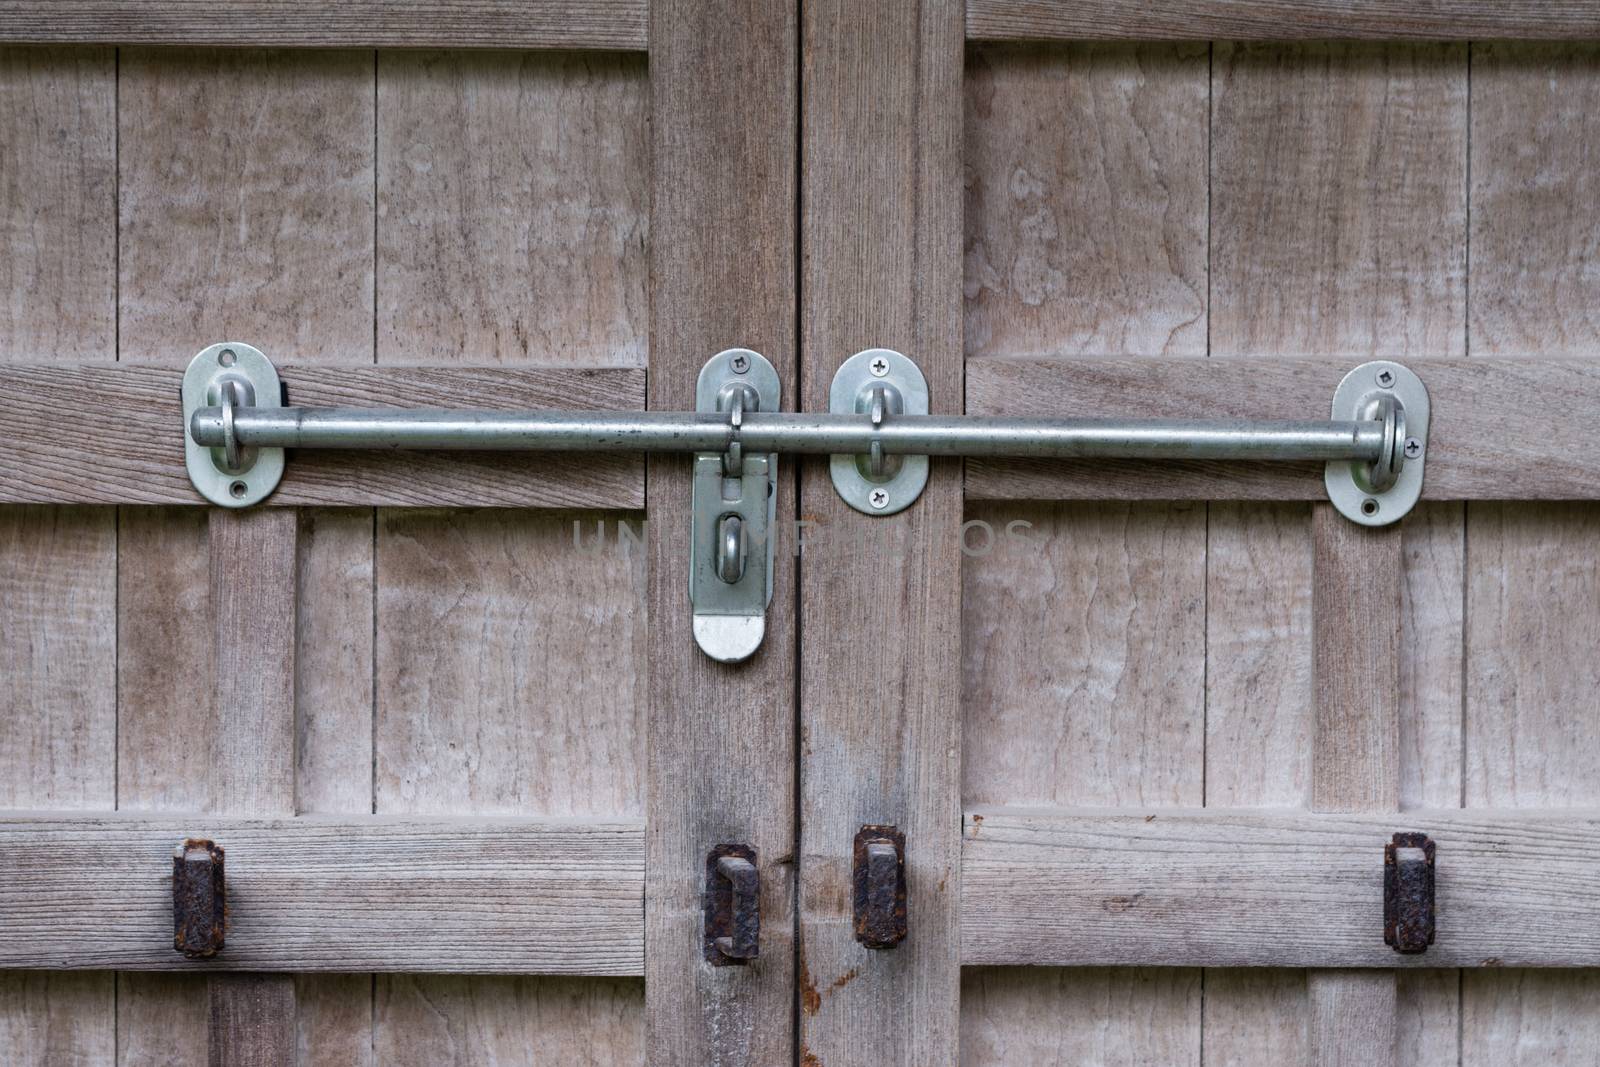 An old wooden door with rusty old locks and newer silver locks